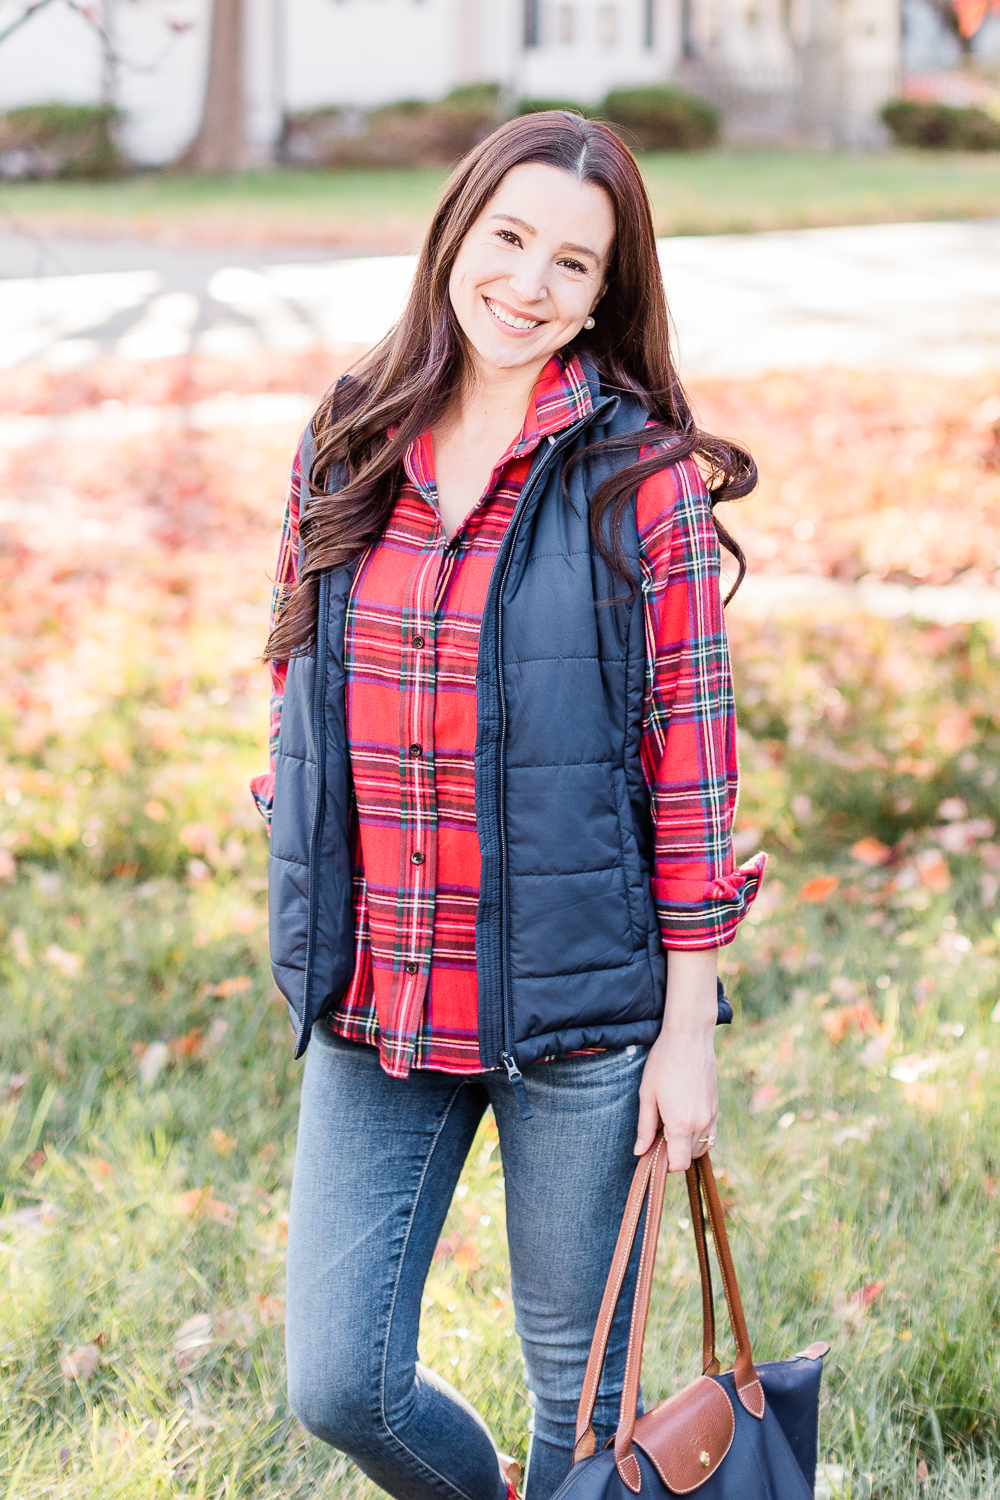 10 Best LL Bean Products for Winter by popular affordable fashion blogger Stephanie Ziajka on Diary of a Debutante, LL Bean Royal Stewart Tartan Relaxed Flannel styled with Classic Bean Boots, Navy Amazon Essentials Puffer Vest, AG Ankle Skinny Jeans, and a Navy Longchamp Le Pliage Tote 